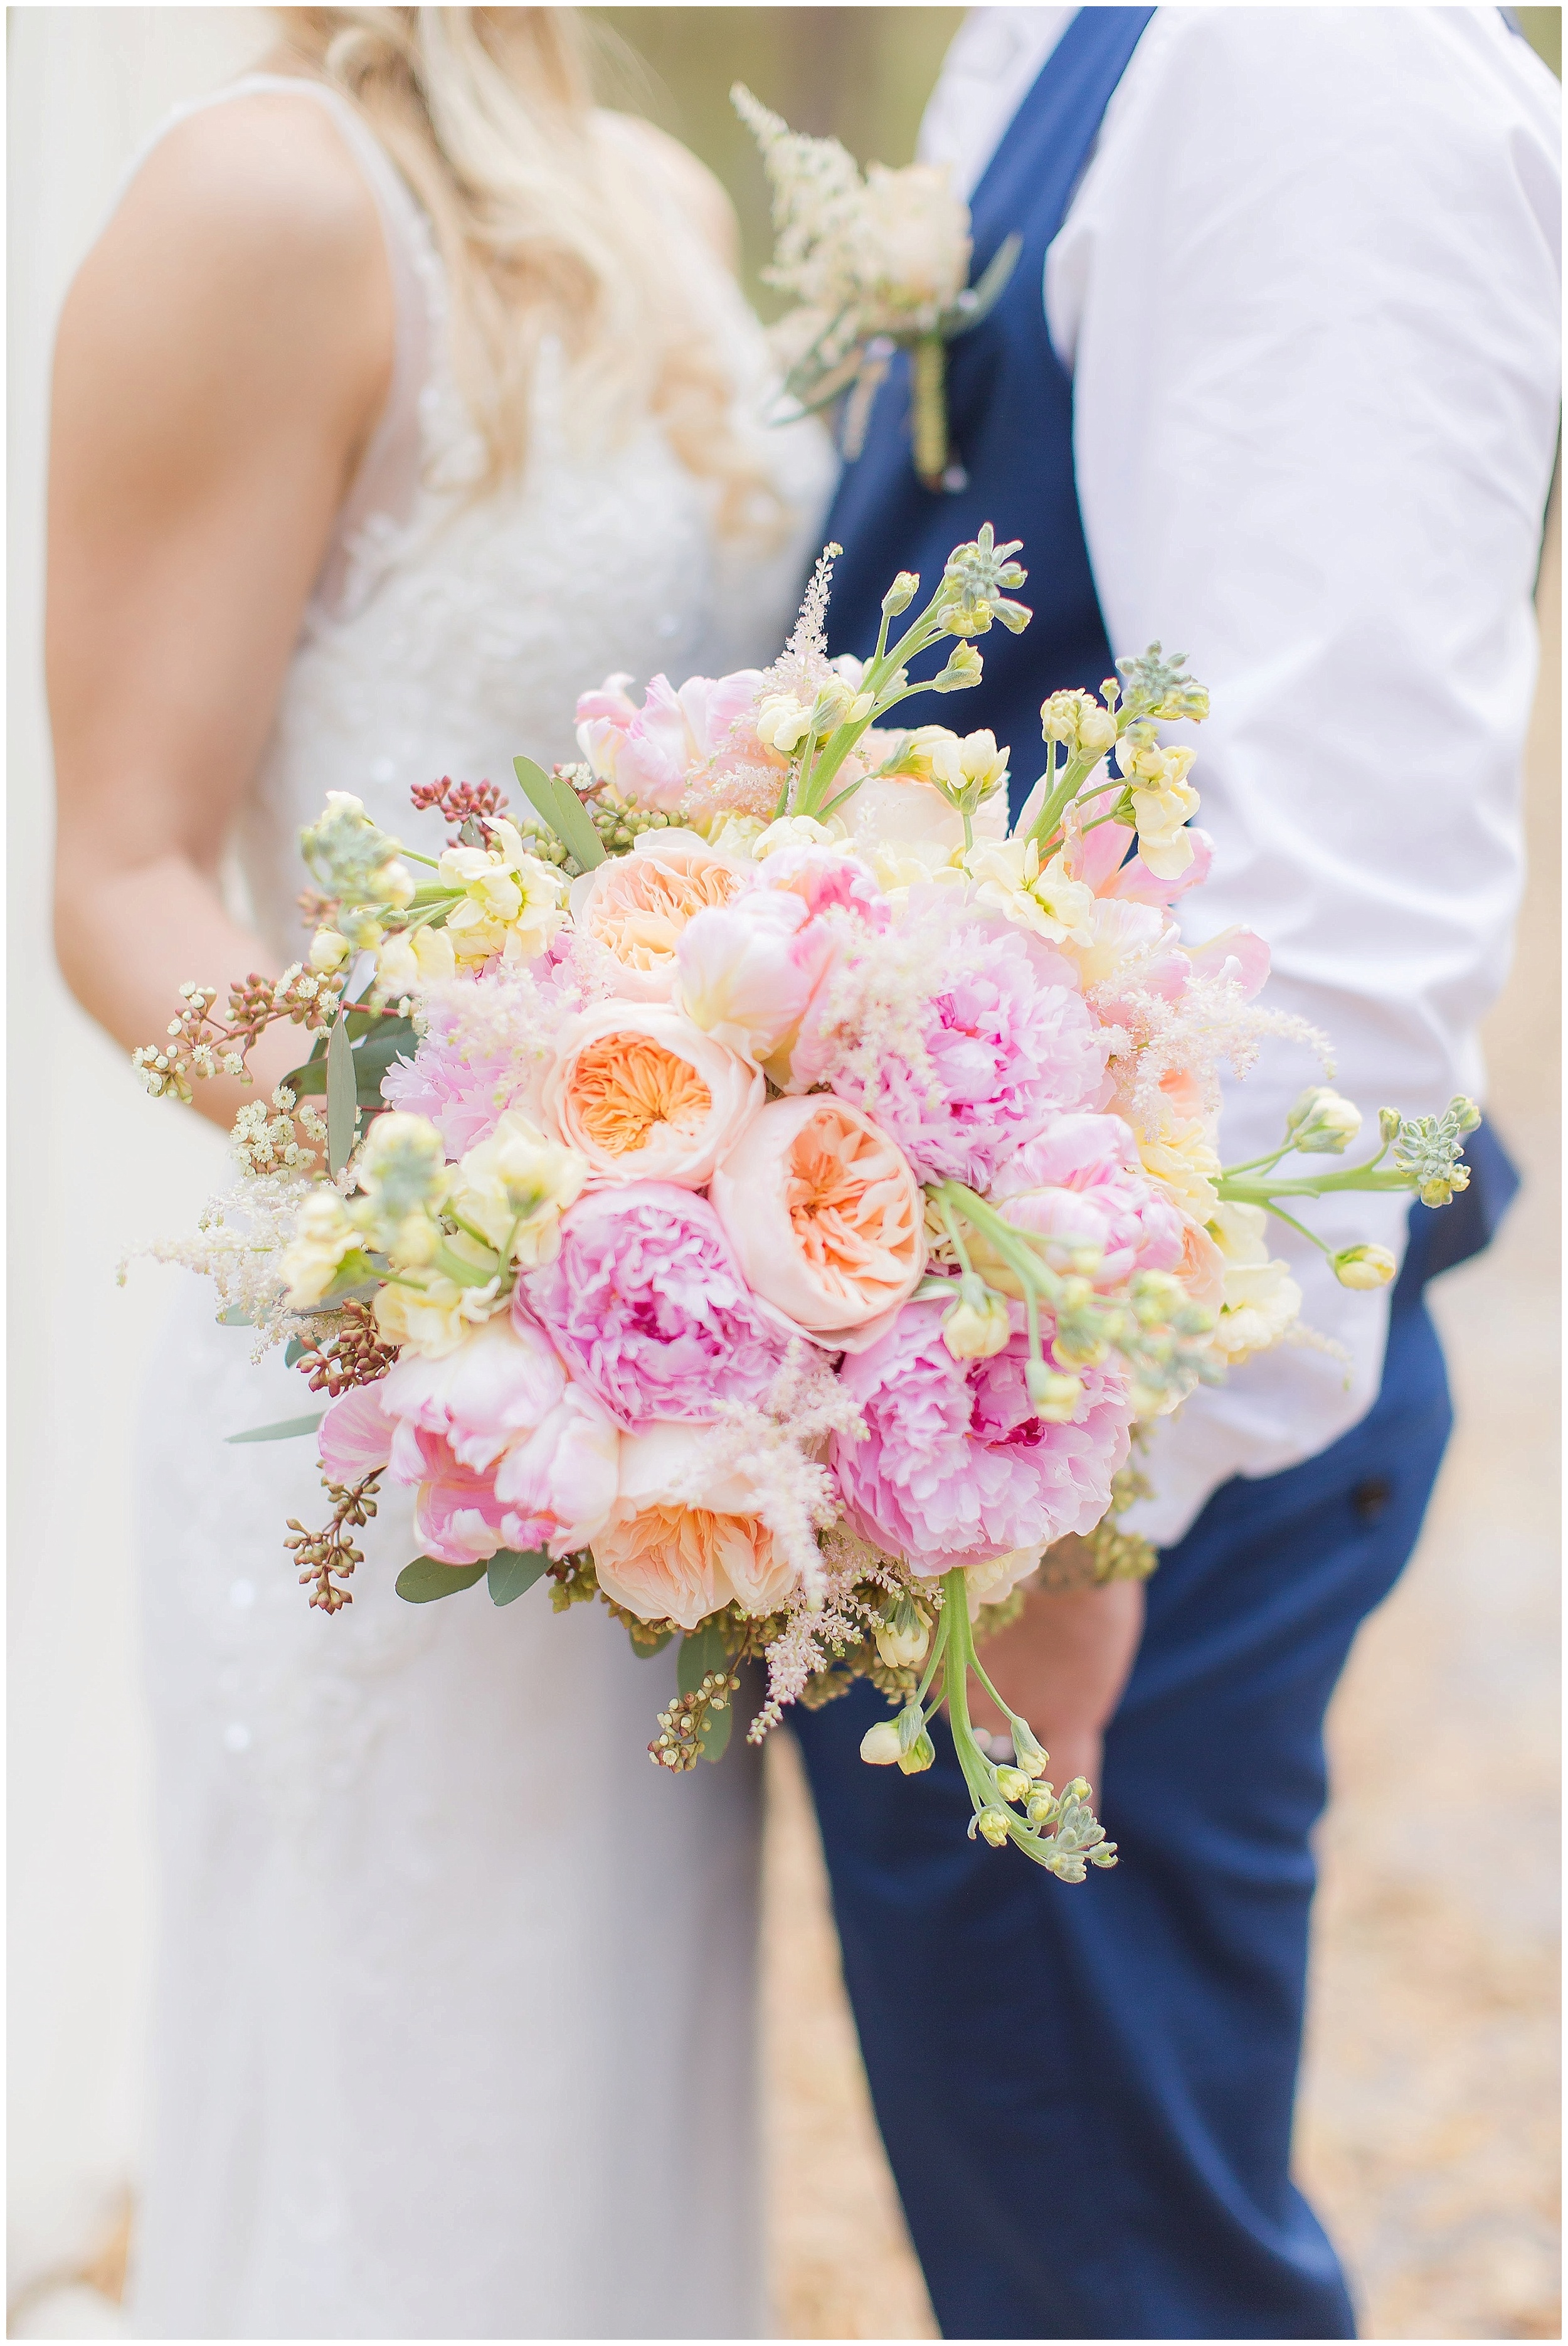 Brides bouquet from Julia's Flowers in Rustic Spring Wedding. 